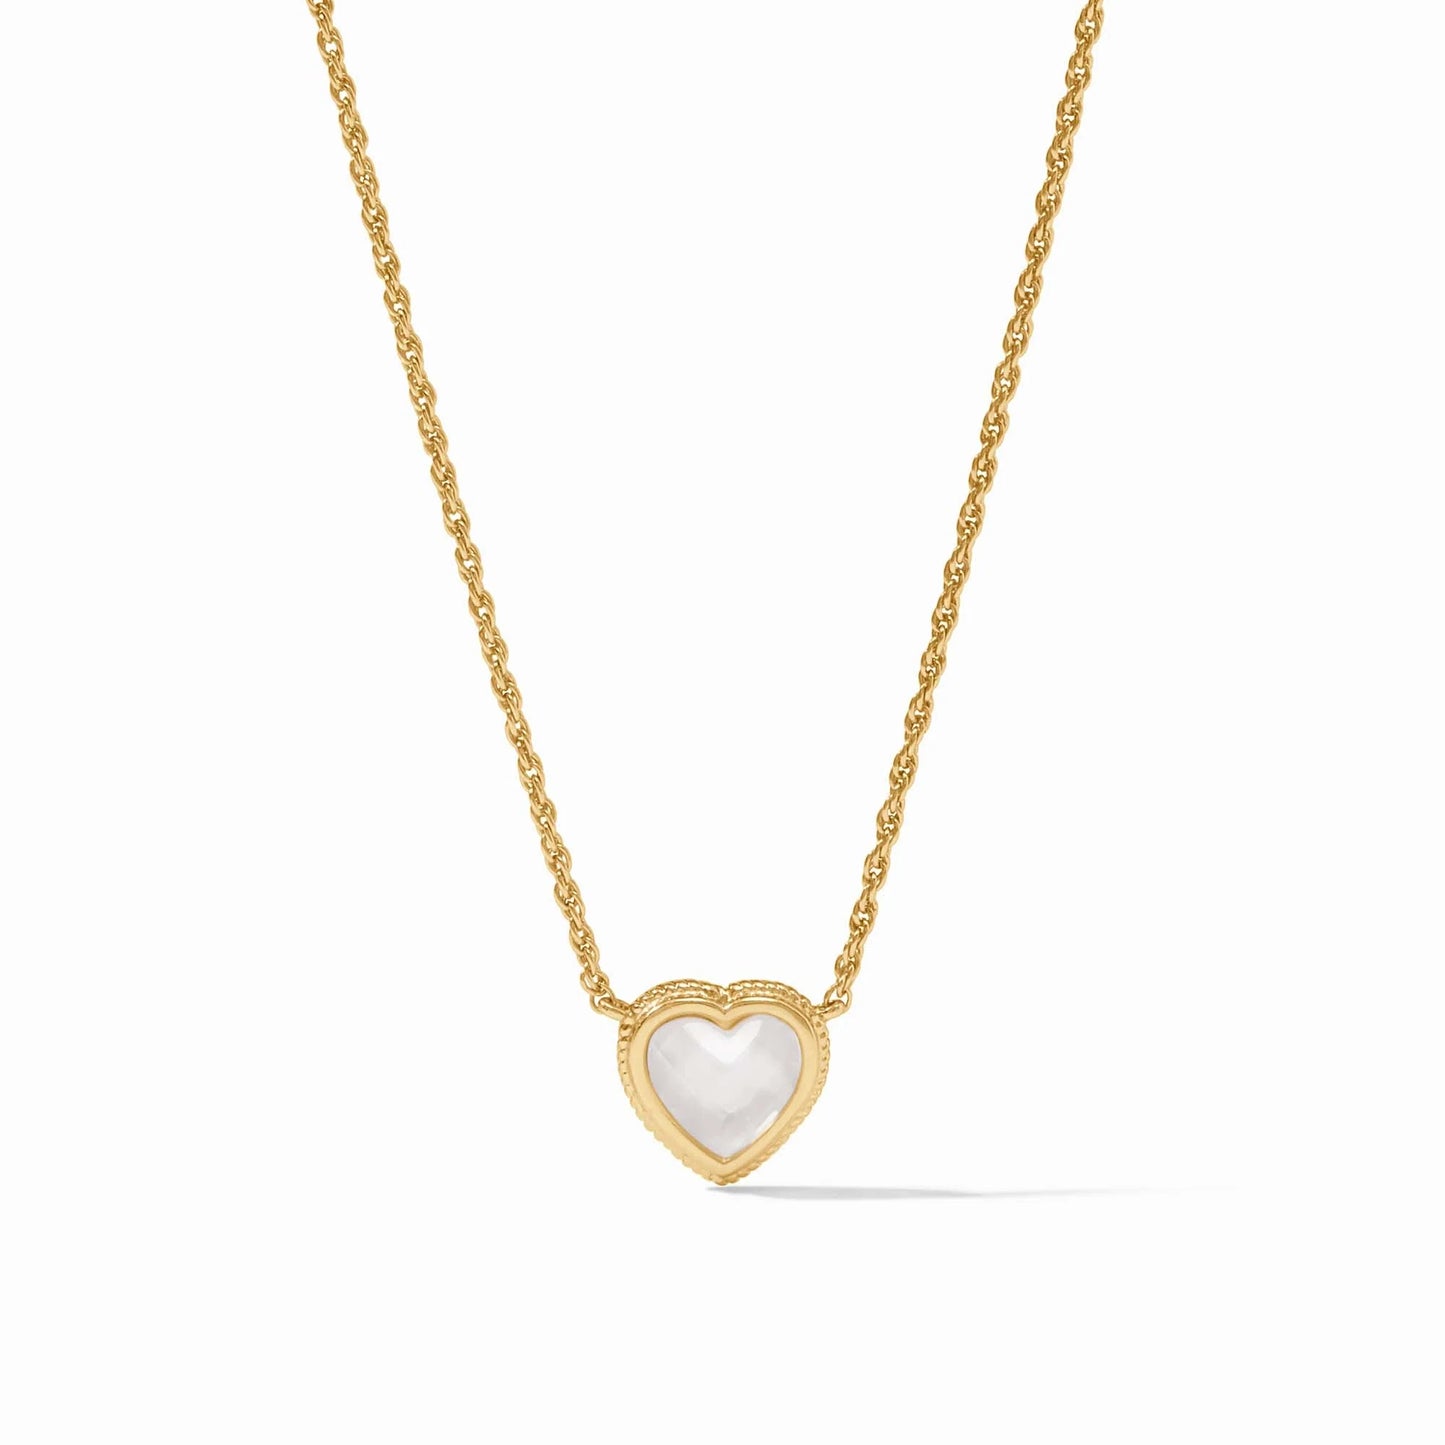 Heart Delicate Necklace - Gold